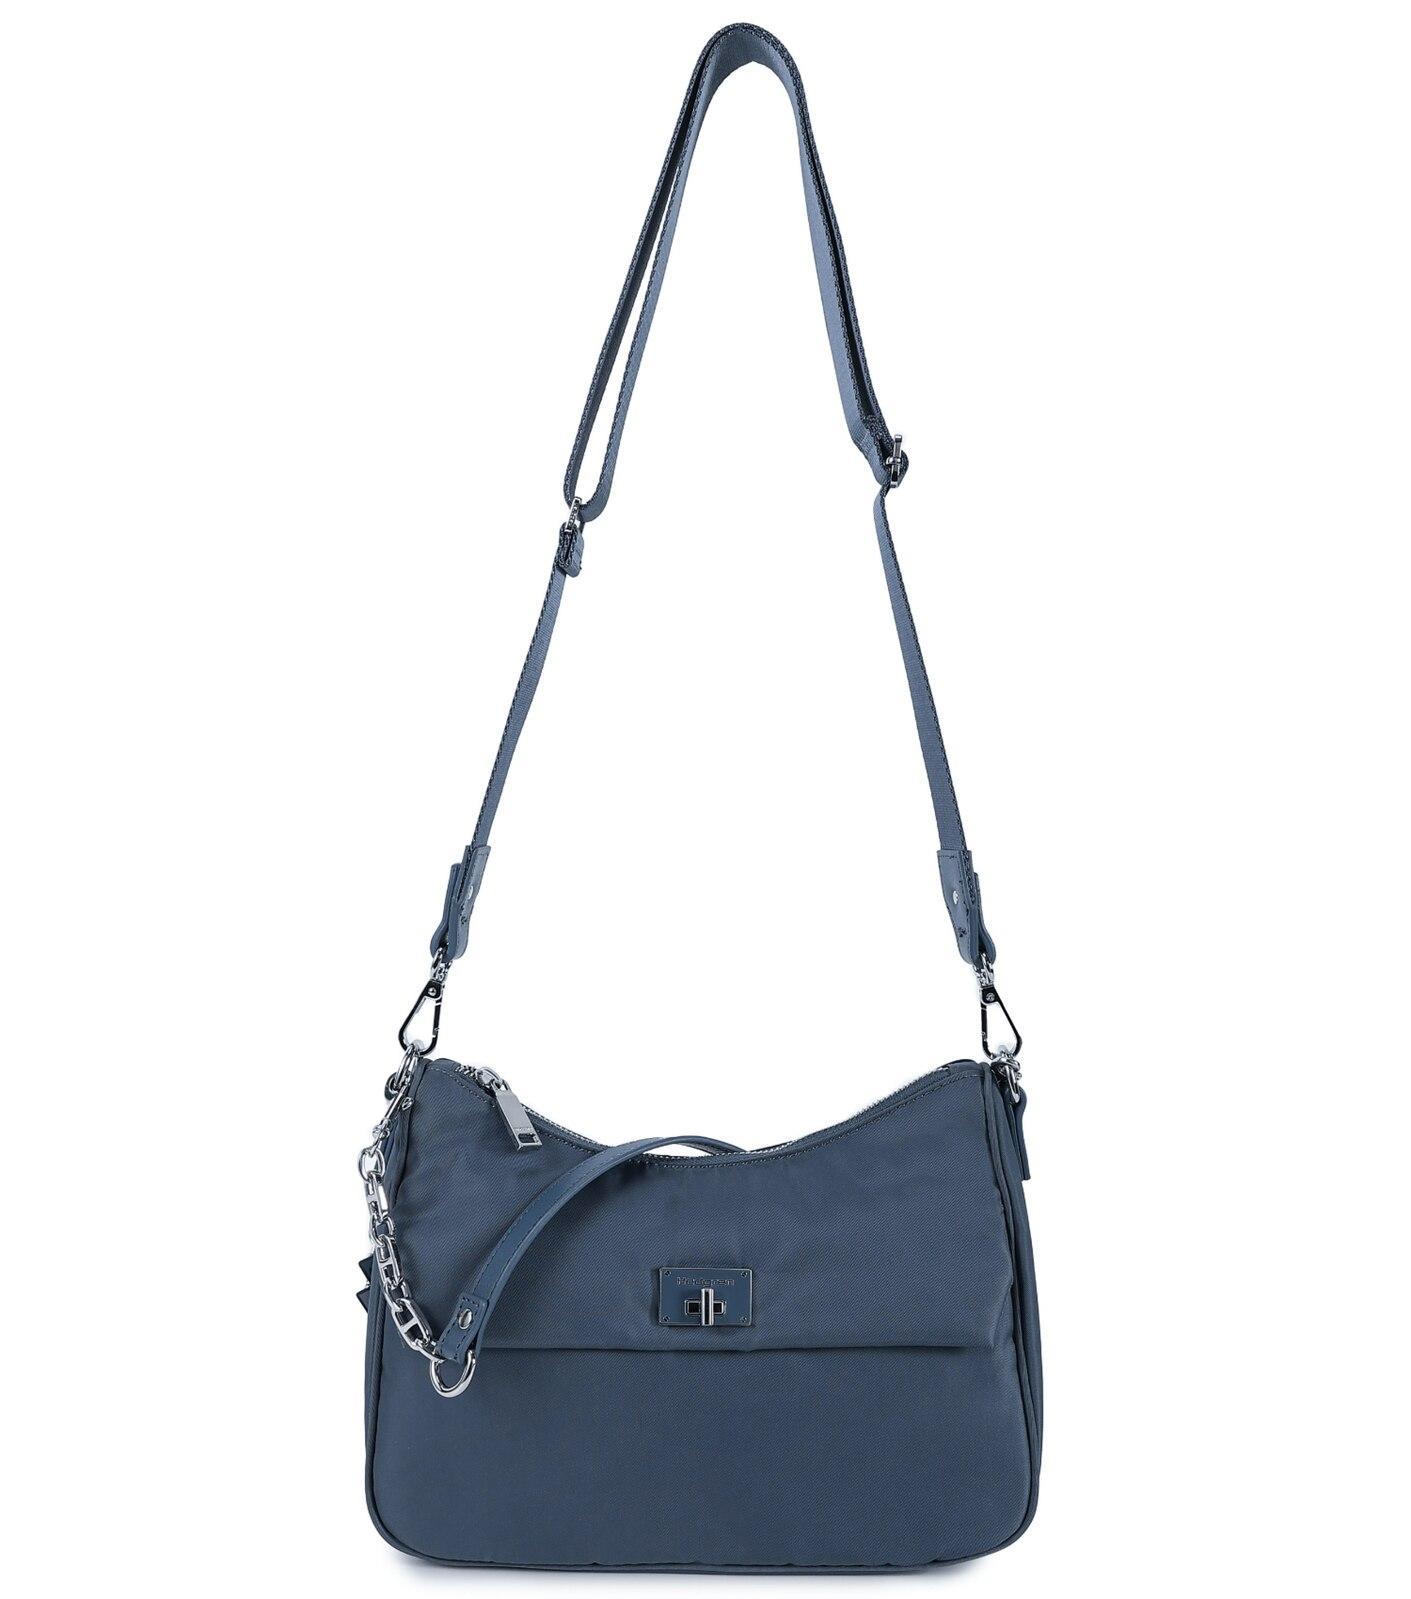 Hedgren Unity Hobo Crossover Bag with RFID - Baltic Blue